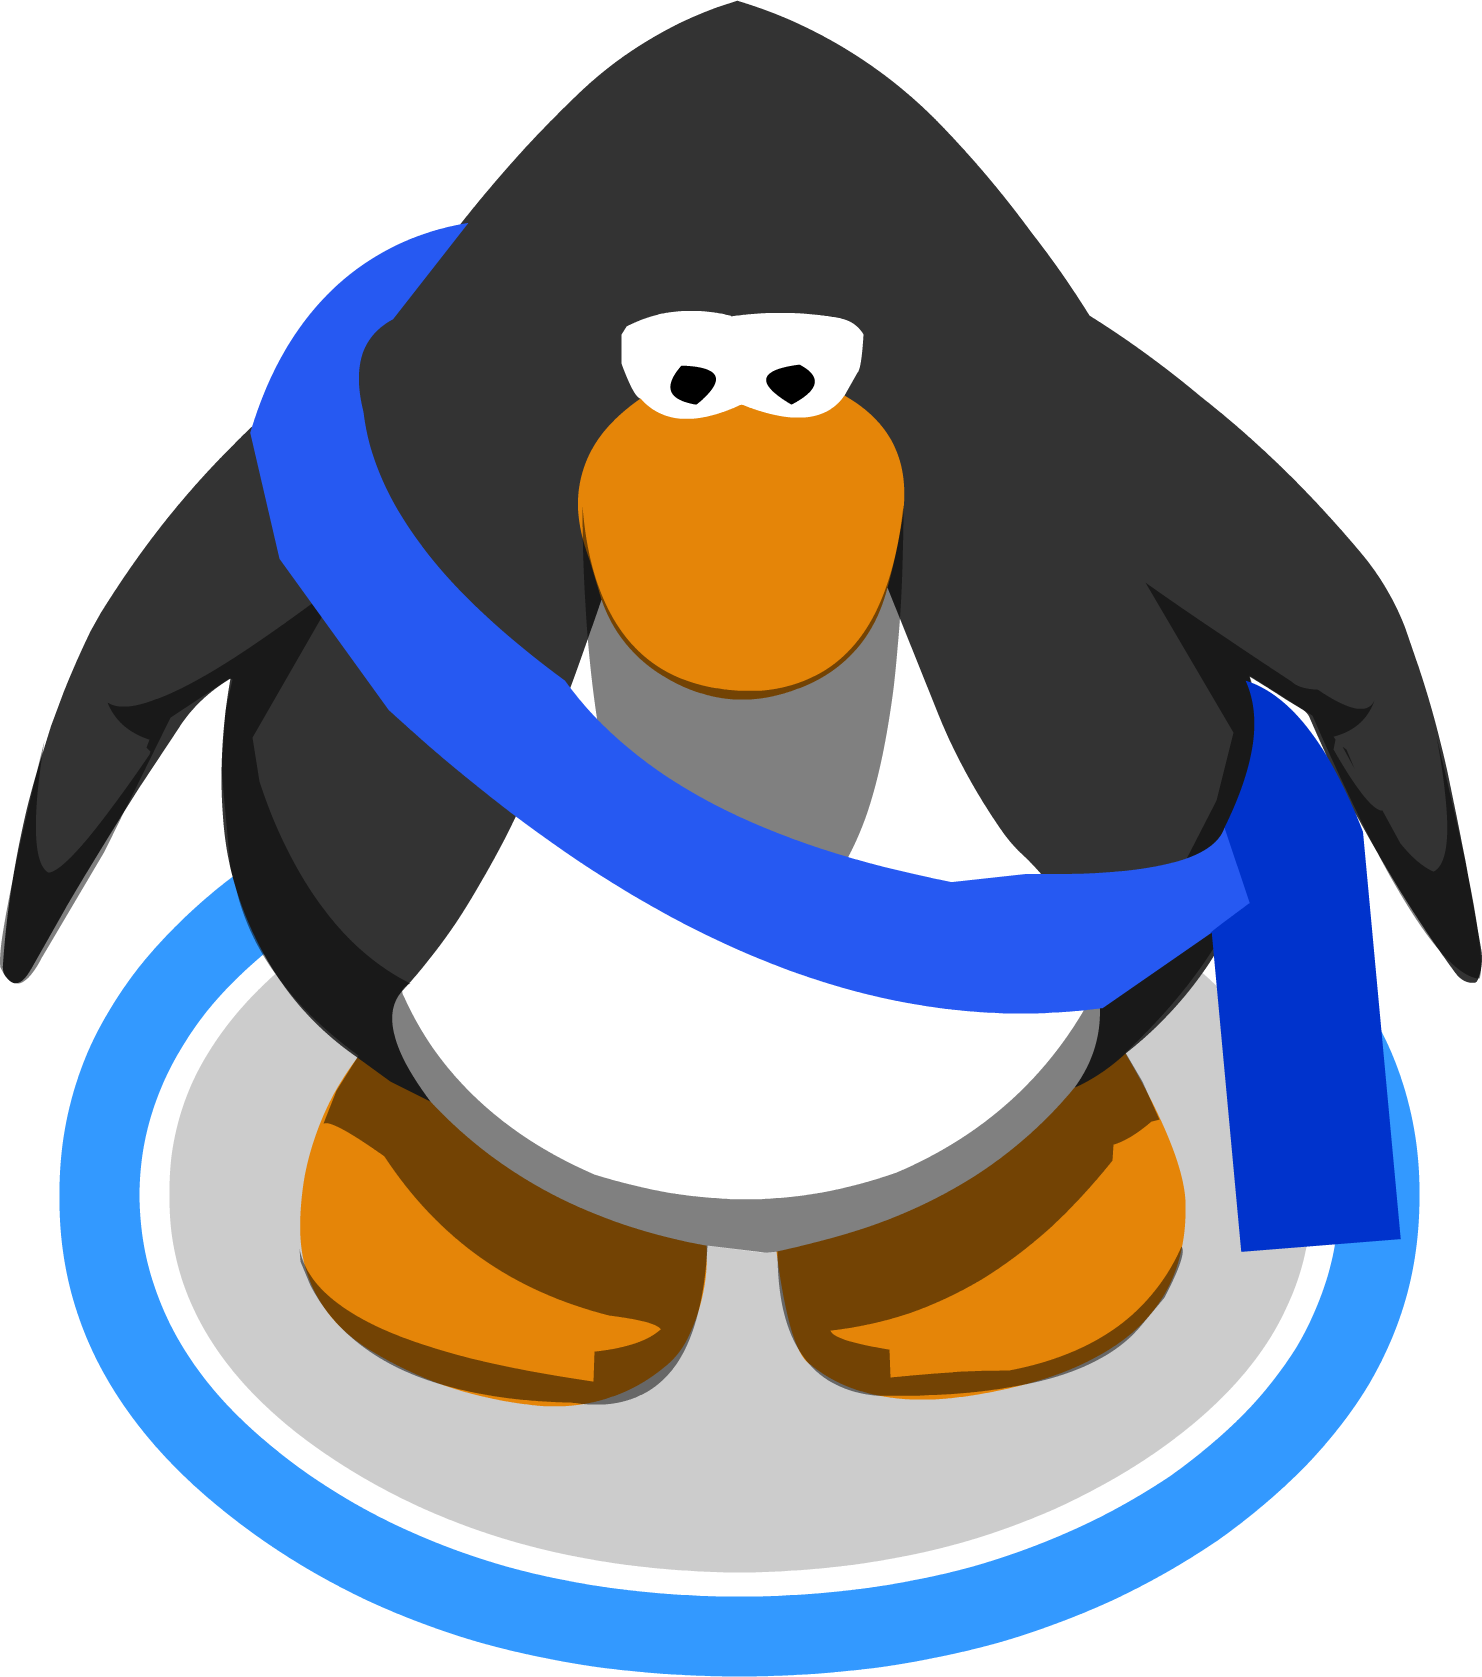 Blue Mail Bag In Game - Club Penguin Penguin In Game (1482x1677)